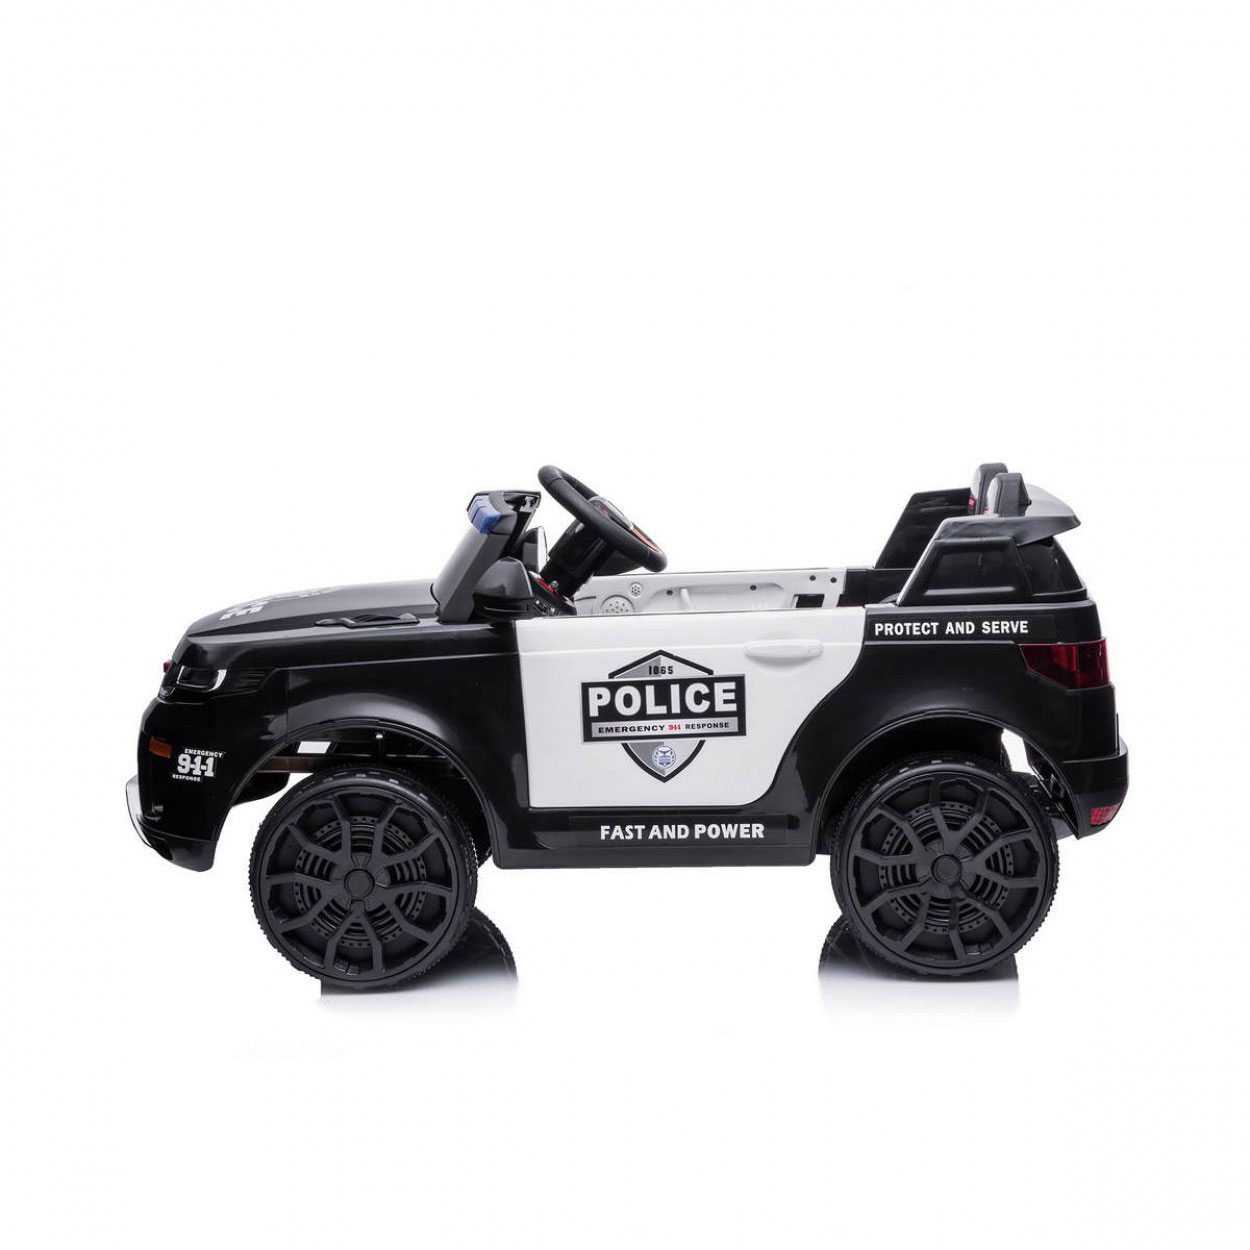 KIDS ELECTRIC POLICE CAR 12V USB/ MP3 WITH REMOTE CONTROL